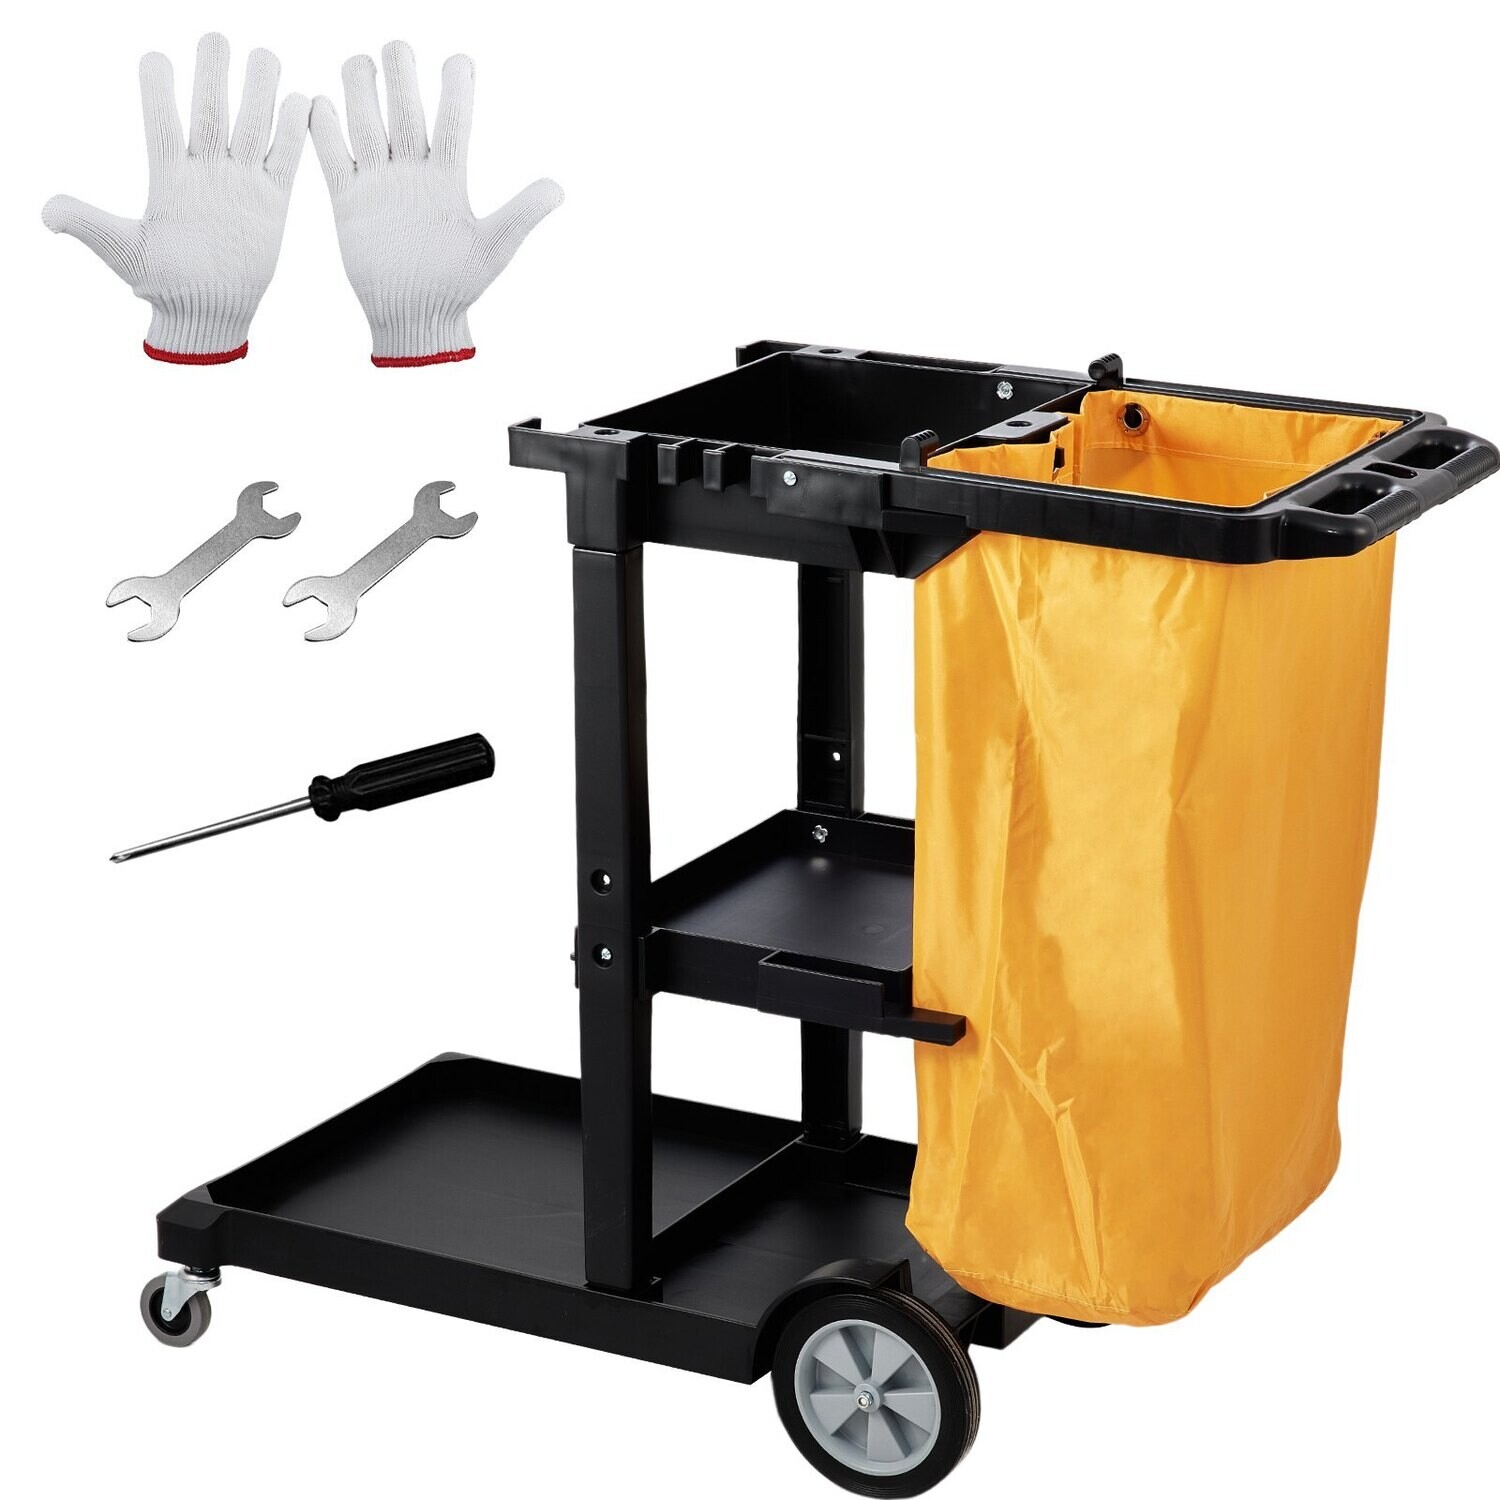 3-Shelf Commercial Janitorial Cart, 200 lbs Capacity Plastic Housekeeping Cart, with 25 Gallon PVC Bag and Cover, 47&quot; x 20&quot; x 38.6&quot;